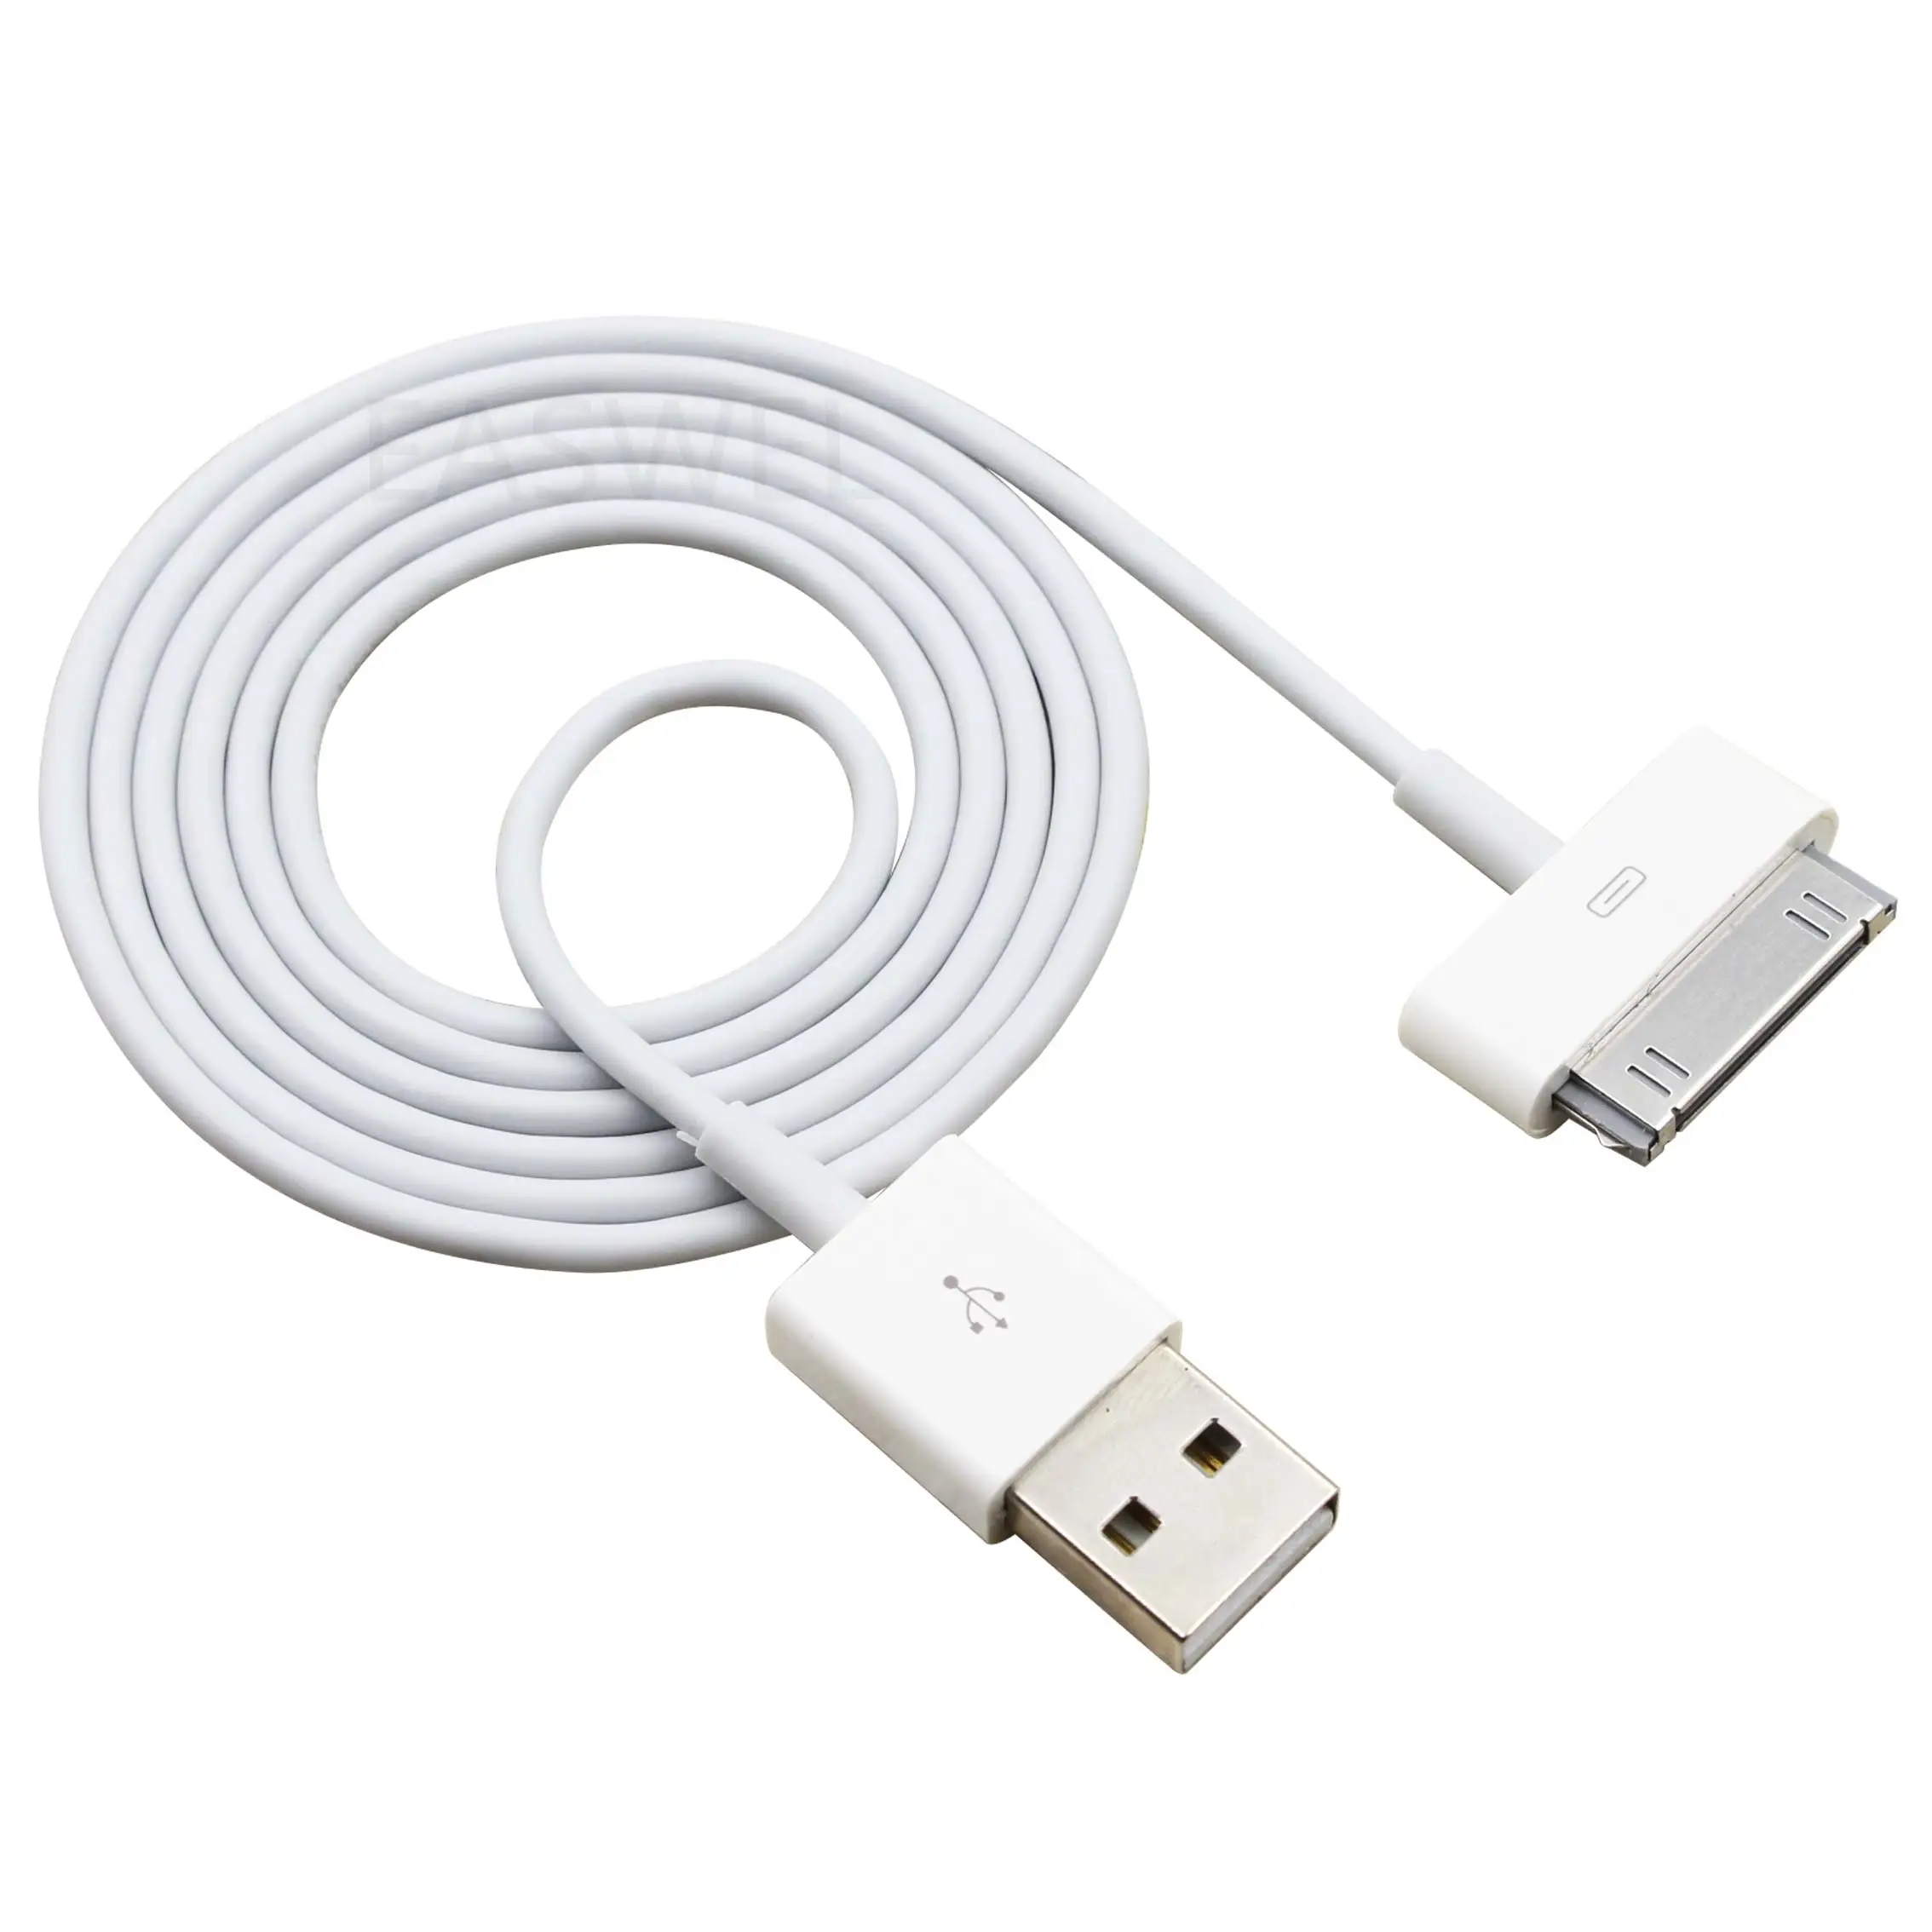 NEW USB Charger Cord for Apple iPod Nano Classic 2 3 5 GEN 50+SOLD _ - AliExpress Mobile